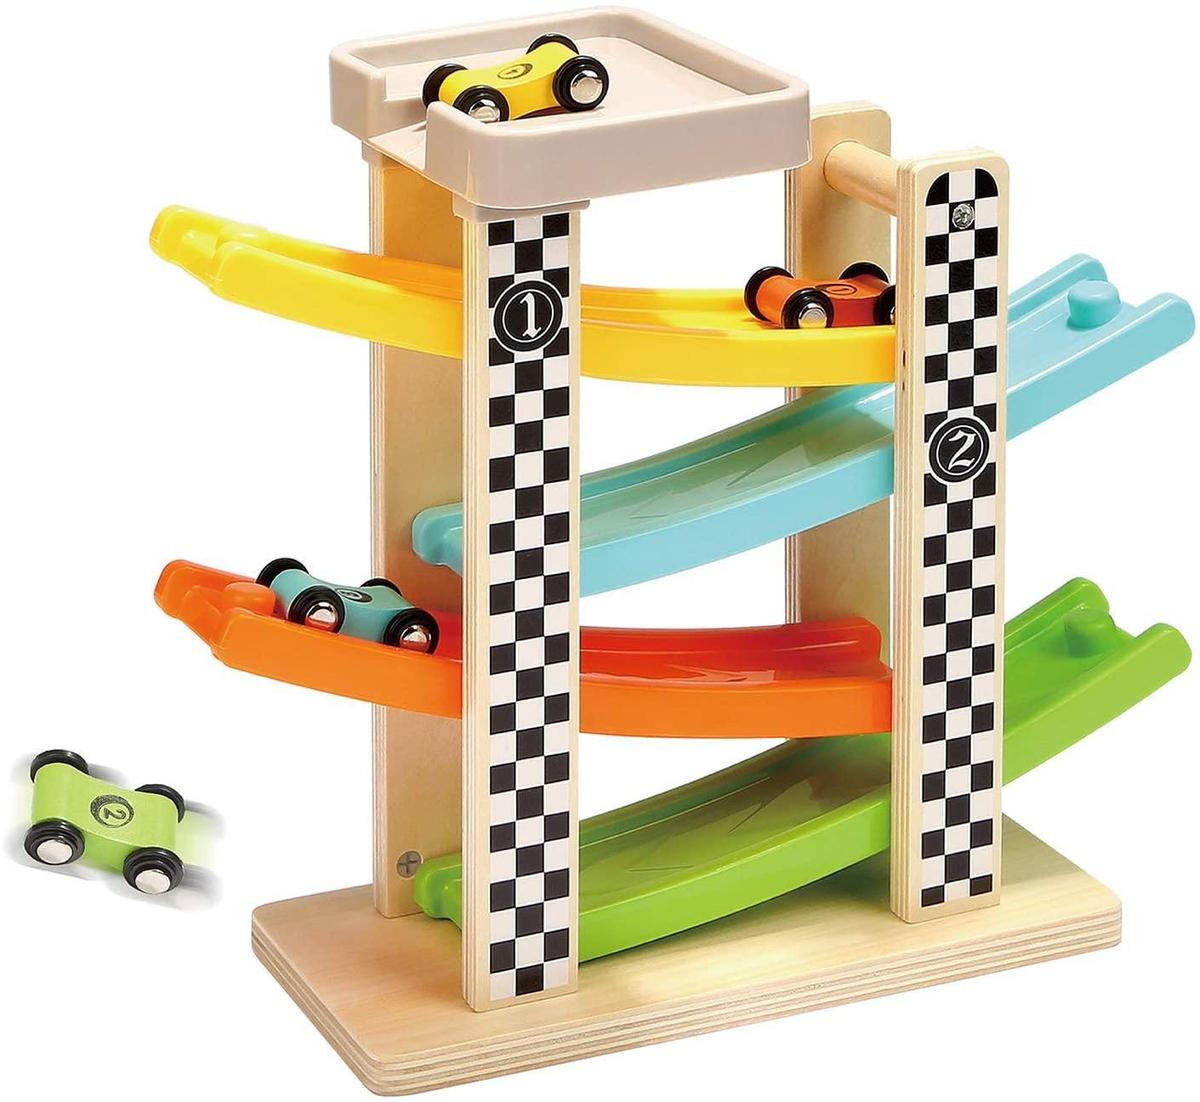 TOP BRIGHT Toddler Toys For 1 2 Year Old Boy And Girl Gifts Wooden Race Track - $18.69 MSRP